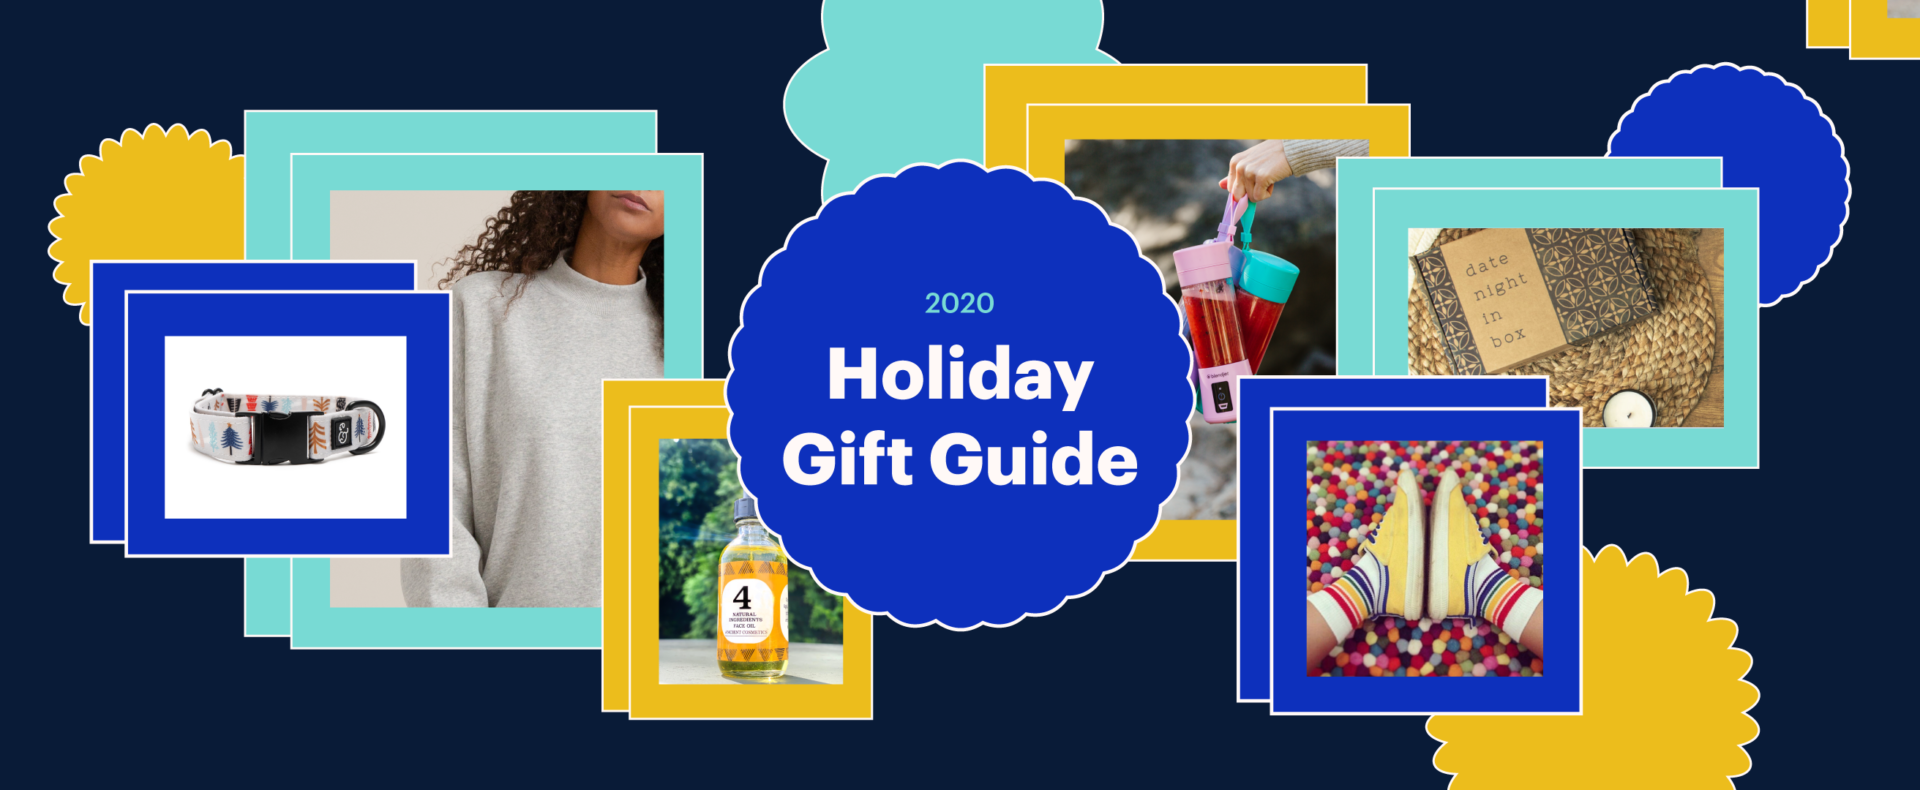 2020 Holiday Gift Guide Feature Image